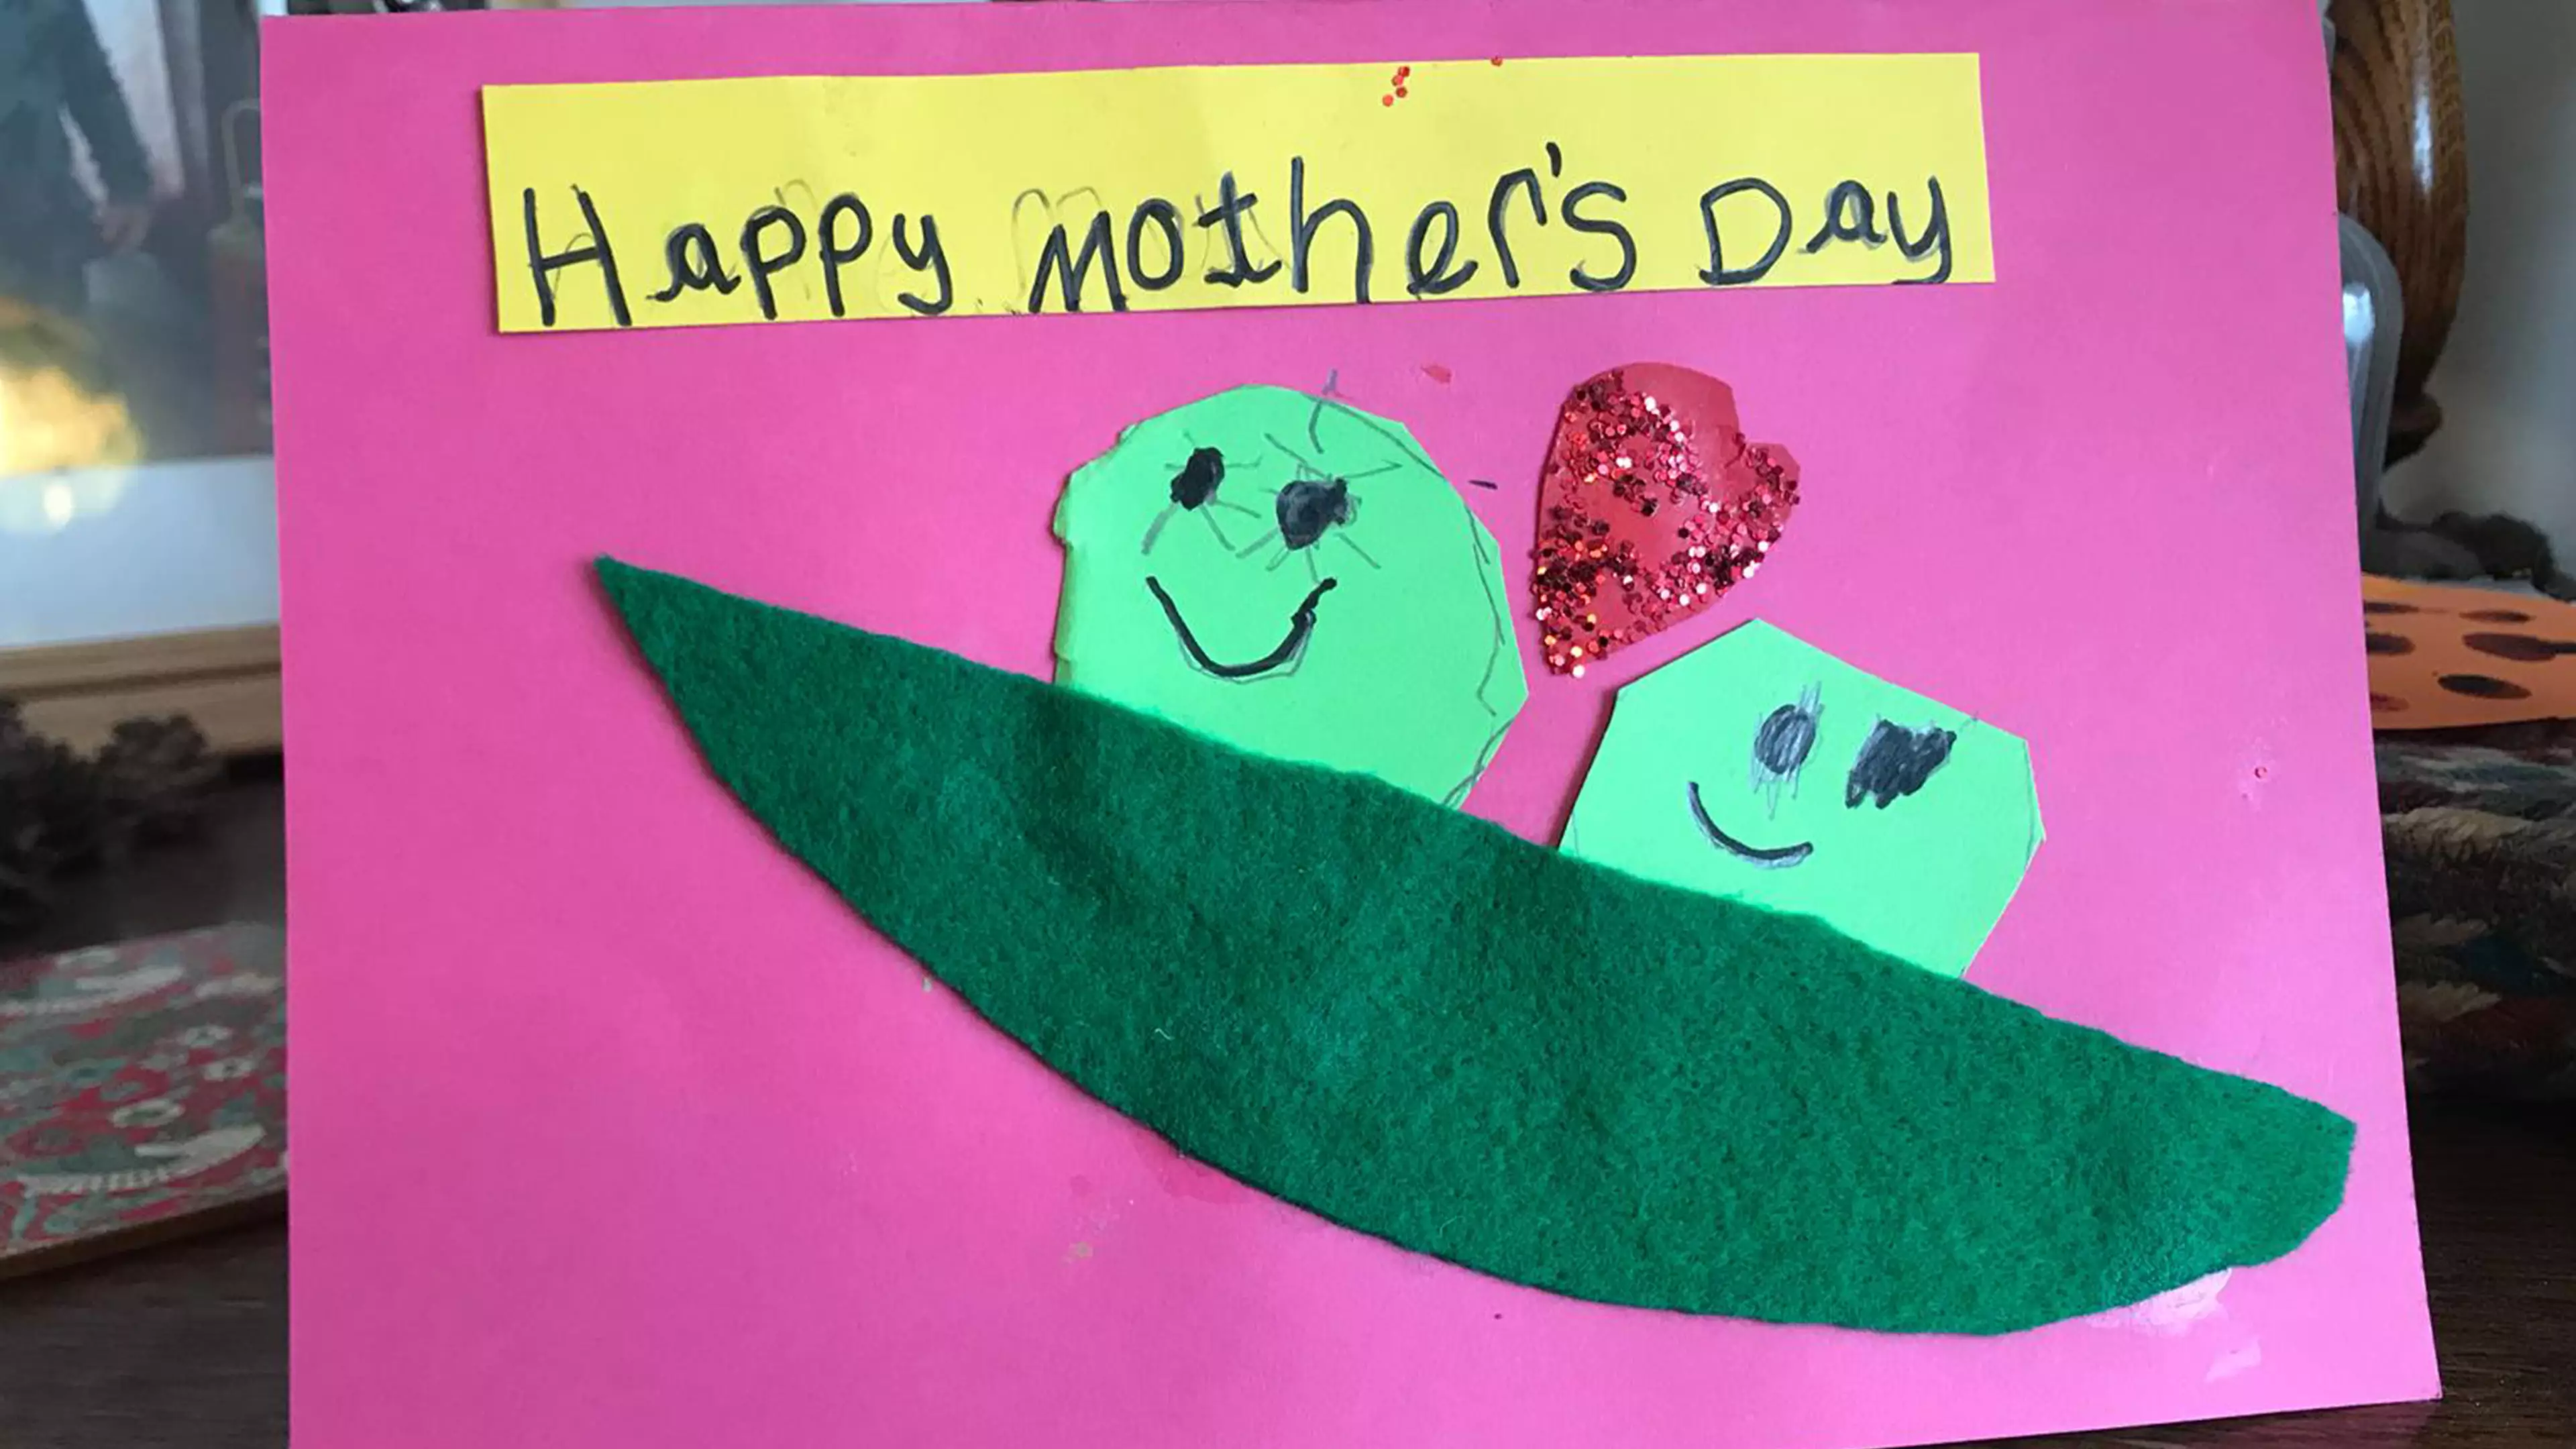 Mum Shocked To Find X-Rated Message From Son In Mother’s Day Card